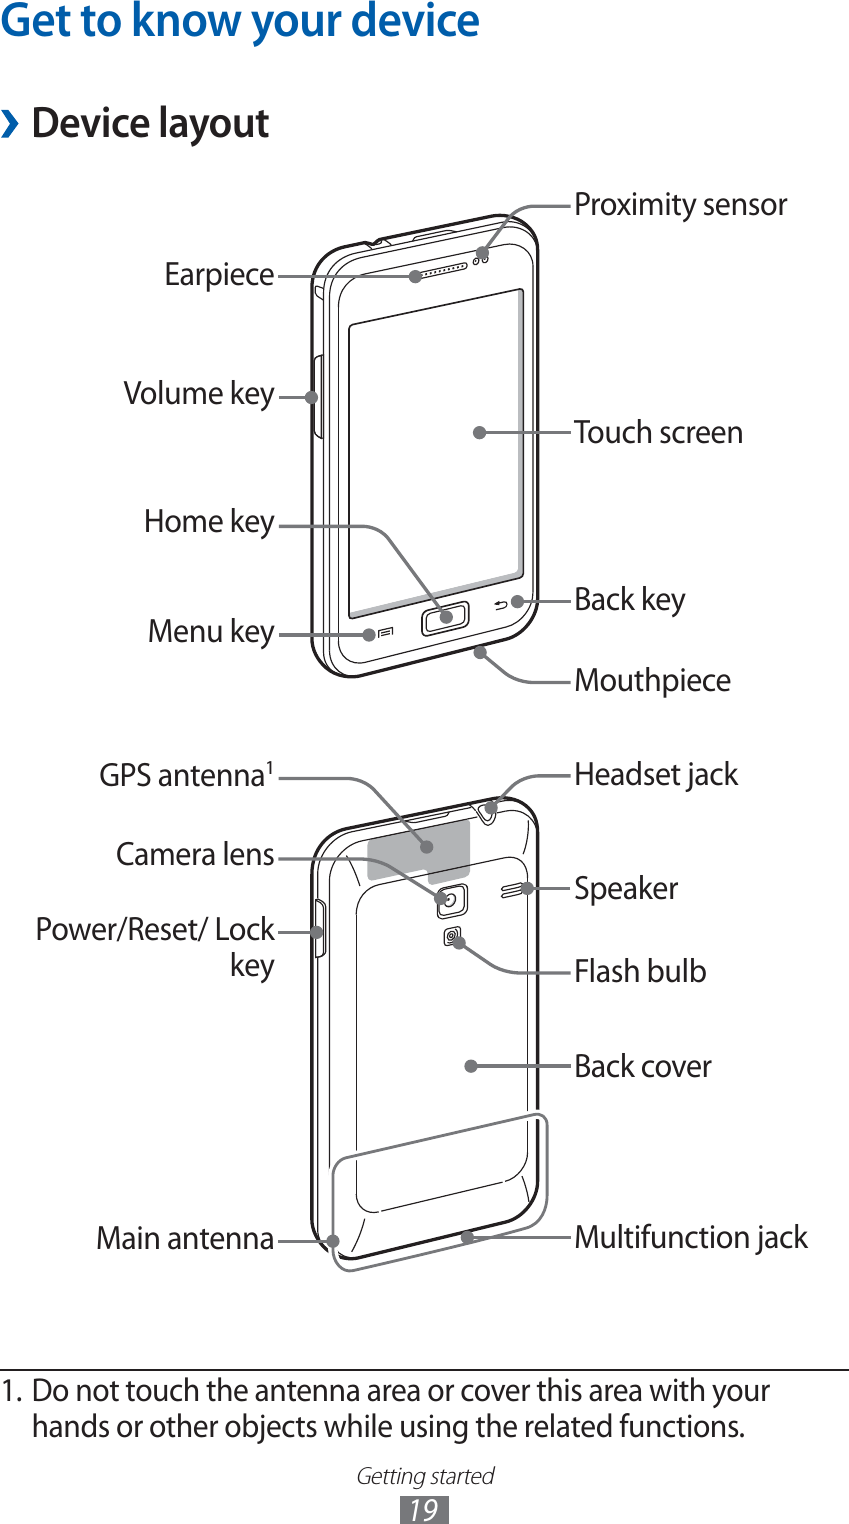 Getting started19Get to know your device ›Device layout1. Do not touch the antenna area or cover this area with your hands or other objects while using the related functions.Home keyVolume keyMenu keyEarpieceGPS antenna1 Main antennaCamera lensPower/Reset/ Lock keyProximity sensorTouch screenMouthpieceBack keyFlash bulbBack coverHeadset jackSpeakerMultifunction jack